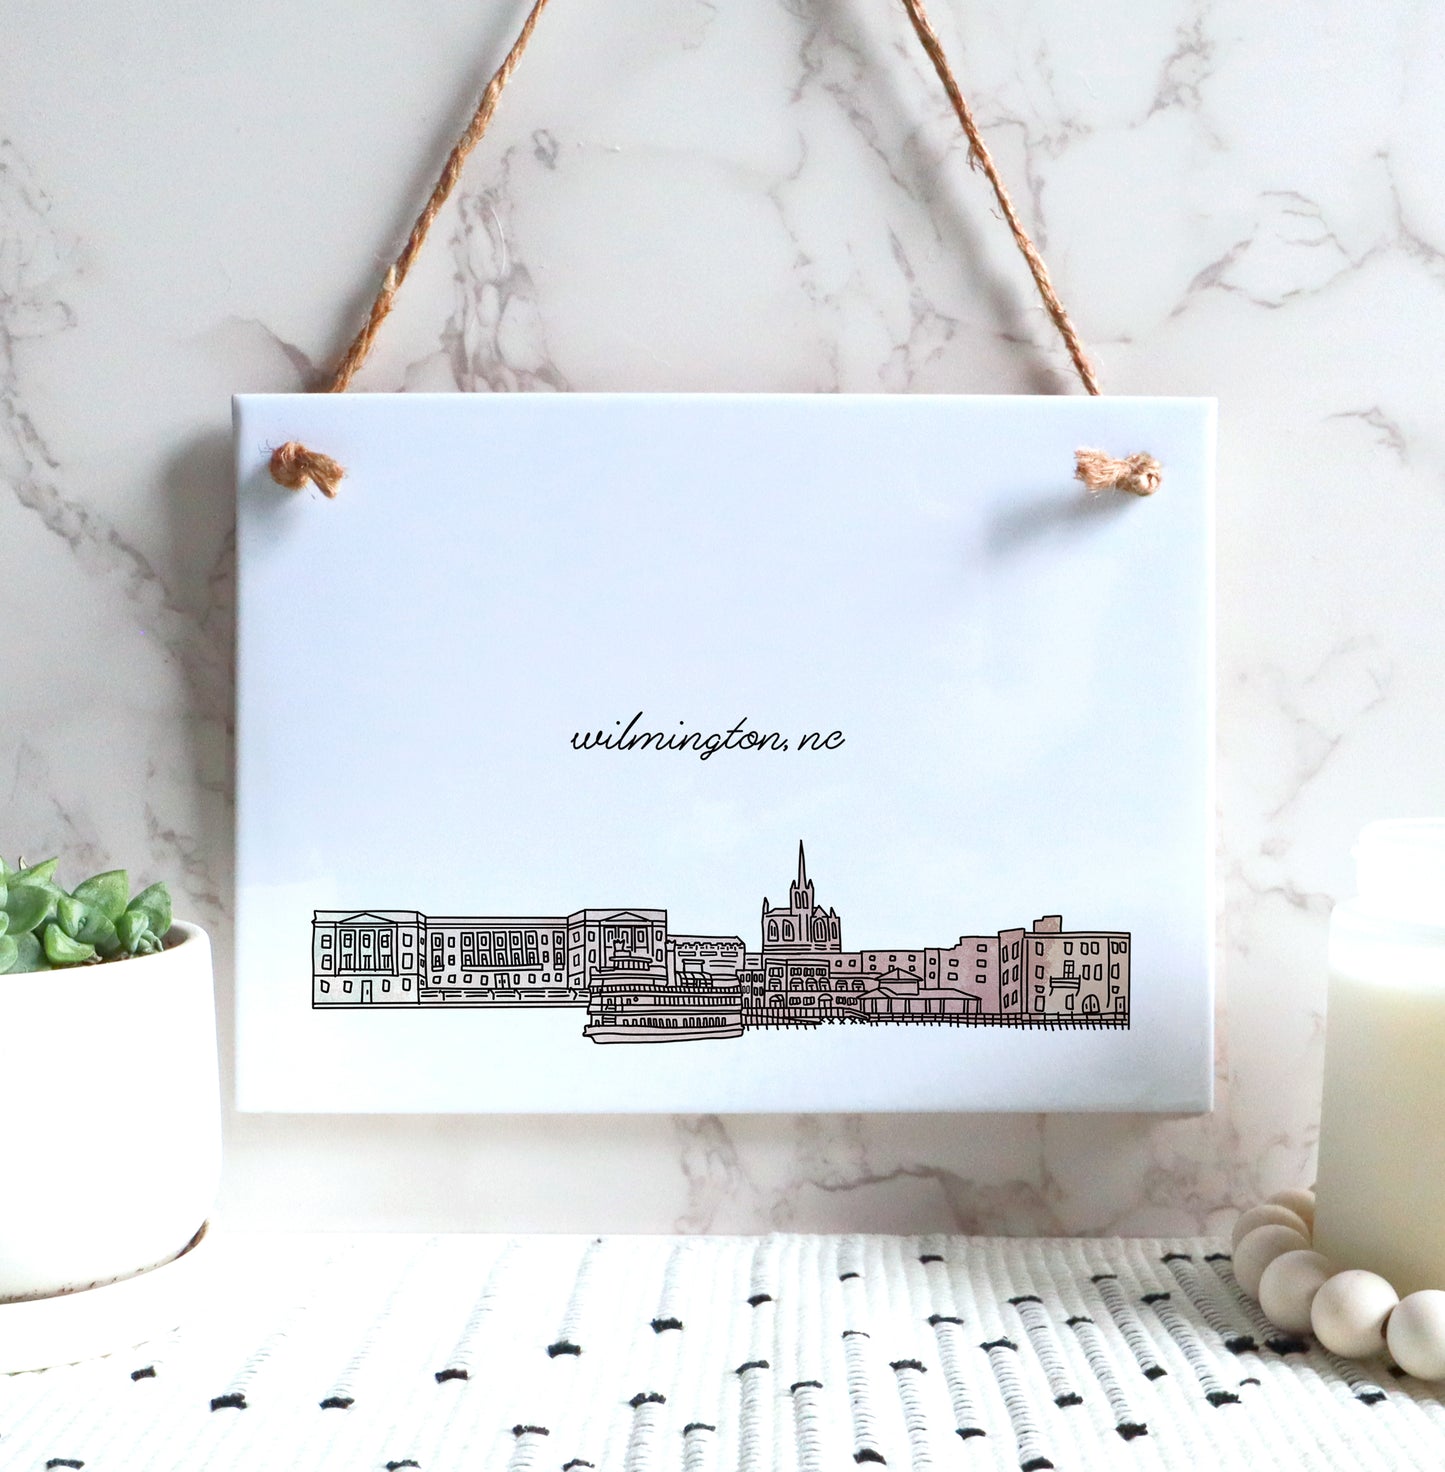 A Wilmington NC souvenir of a drawing of the city skyline on a rectangle tile sign, hanging on a wall - in the color blush